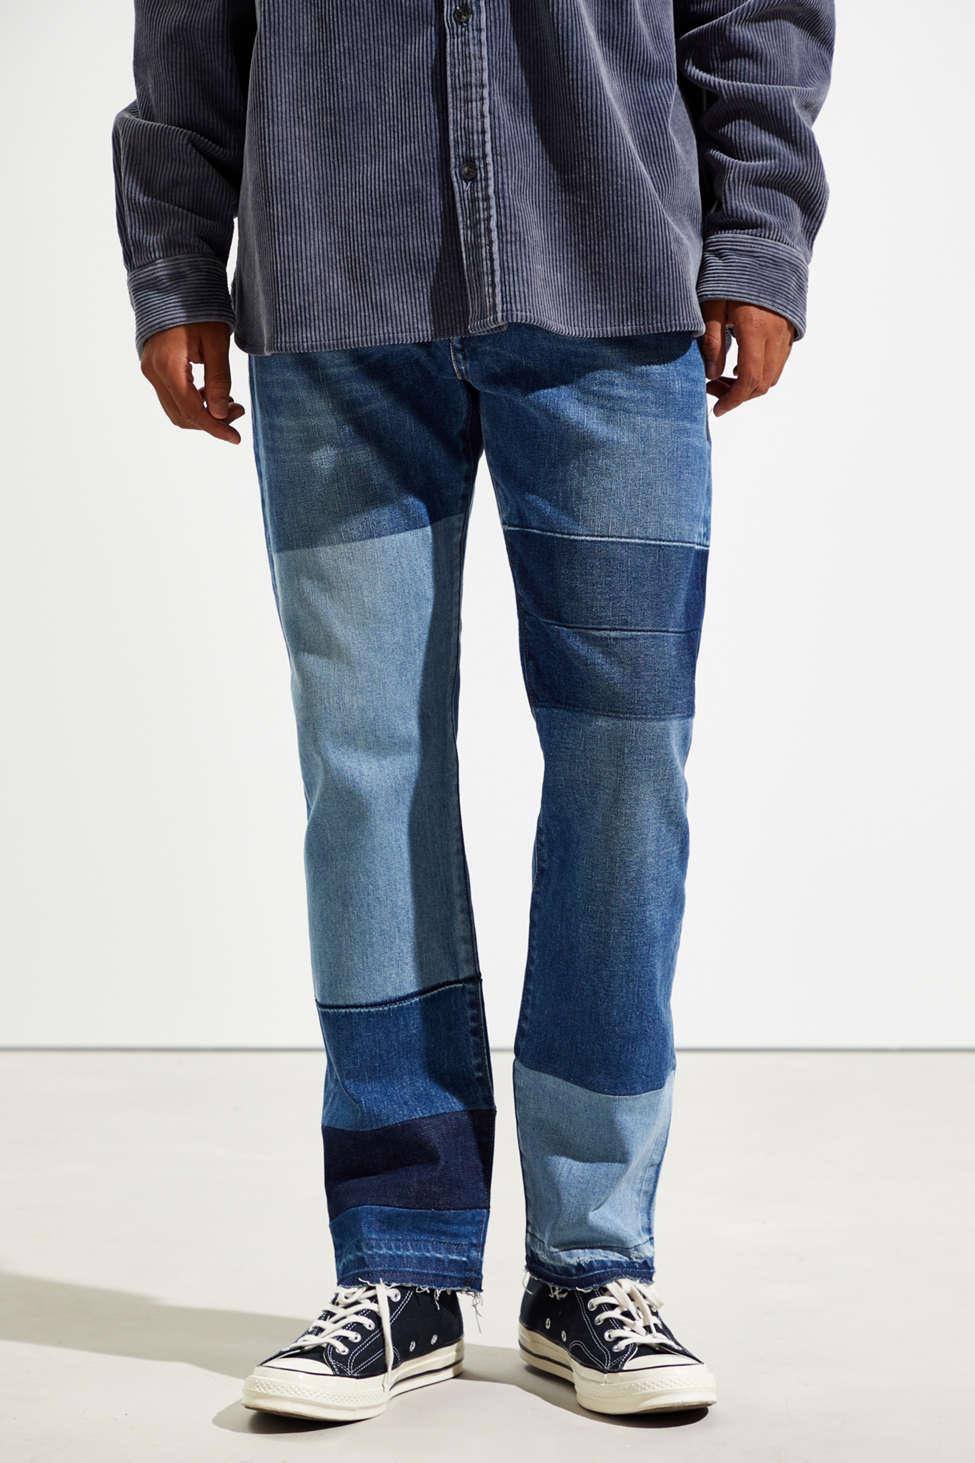 Levi's Levi's Made & Crafted Made In Japan 502 Selvedge Tapered Jean in ...